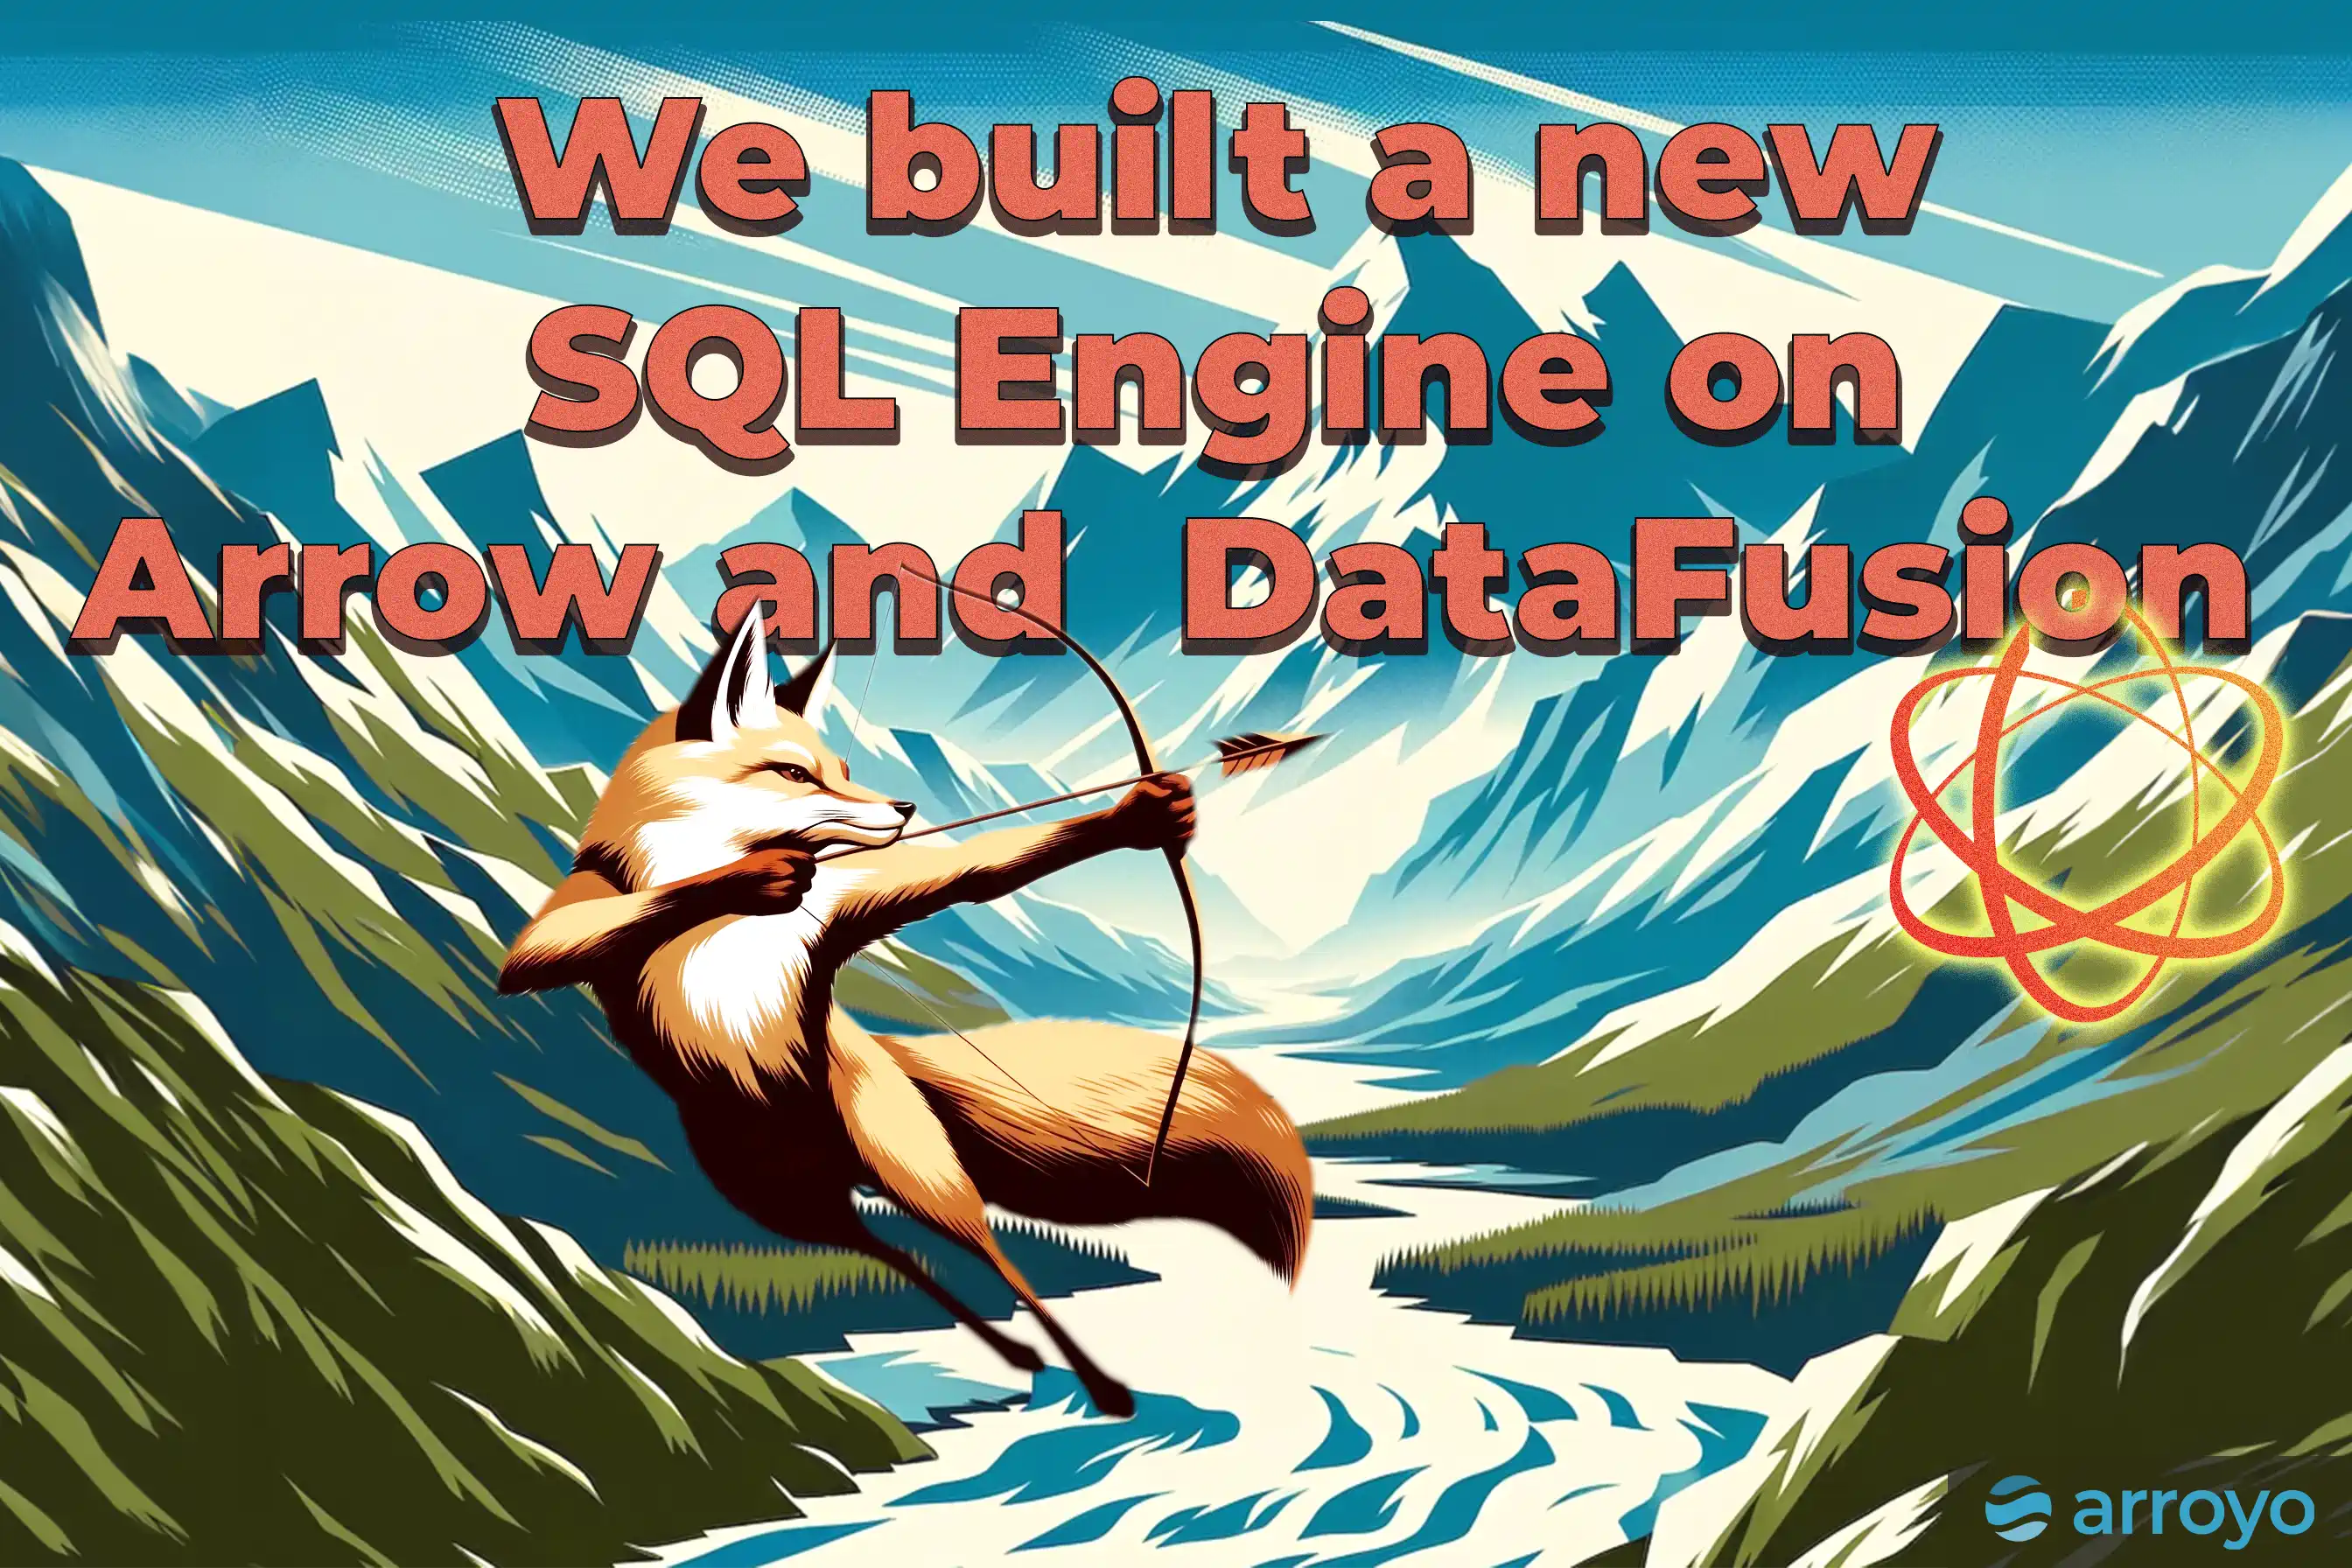 We built a new SQL Engine on Arrow and DataFusion